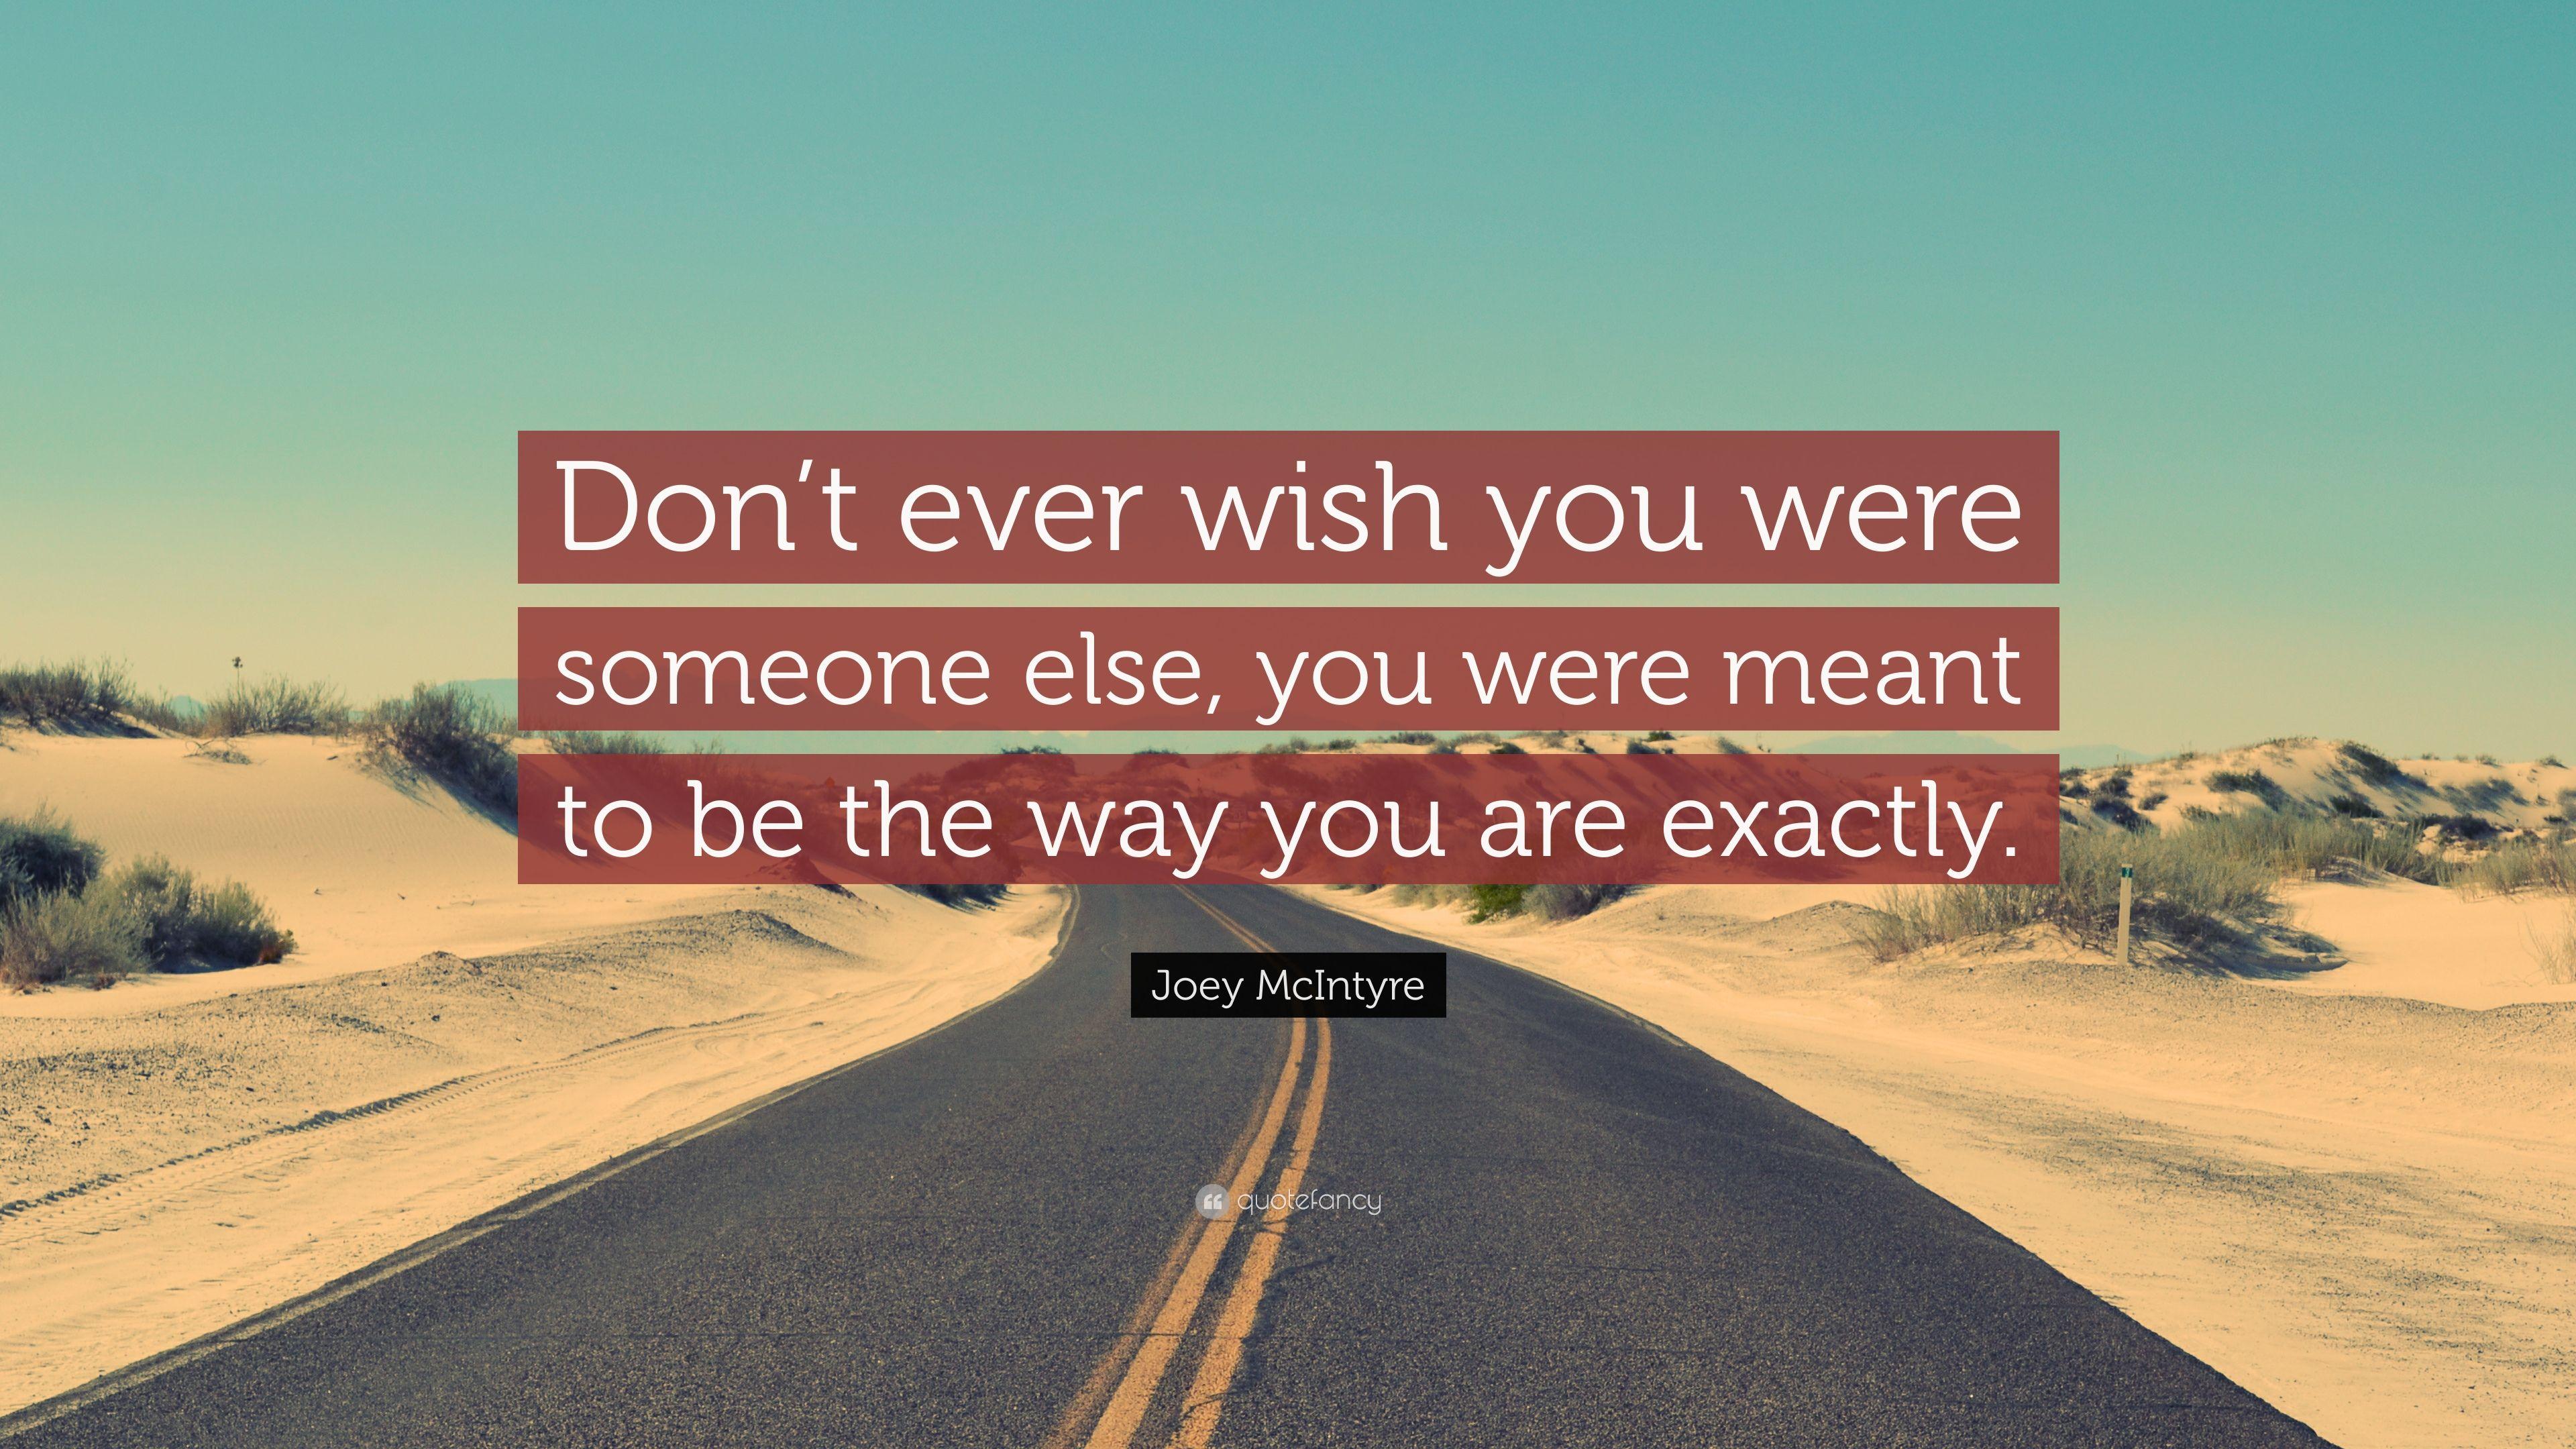 Joey McIntyre Quote: “Don't ever wish you were someone else, you